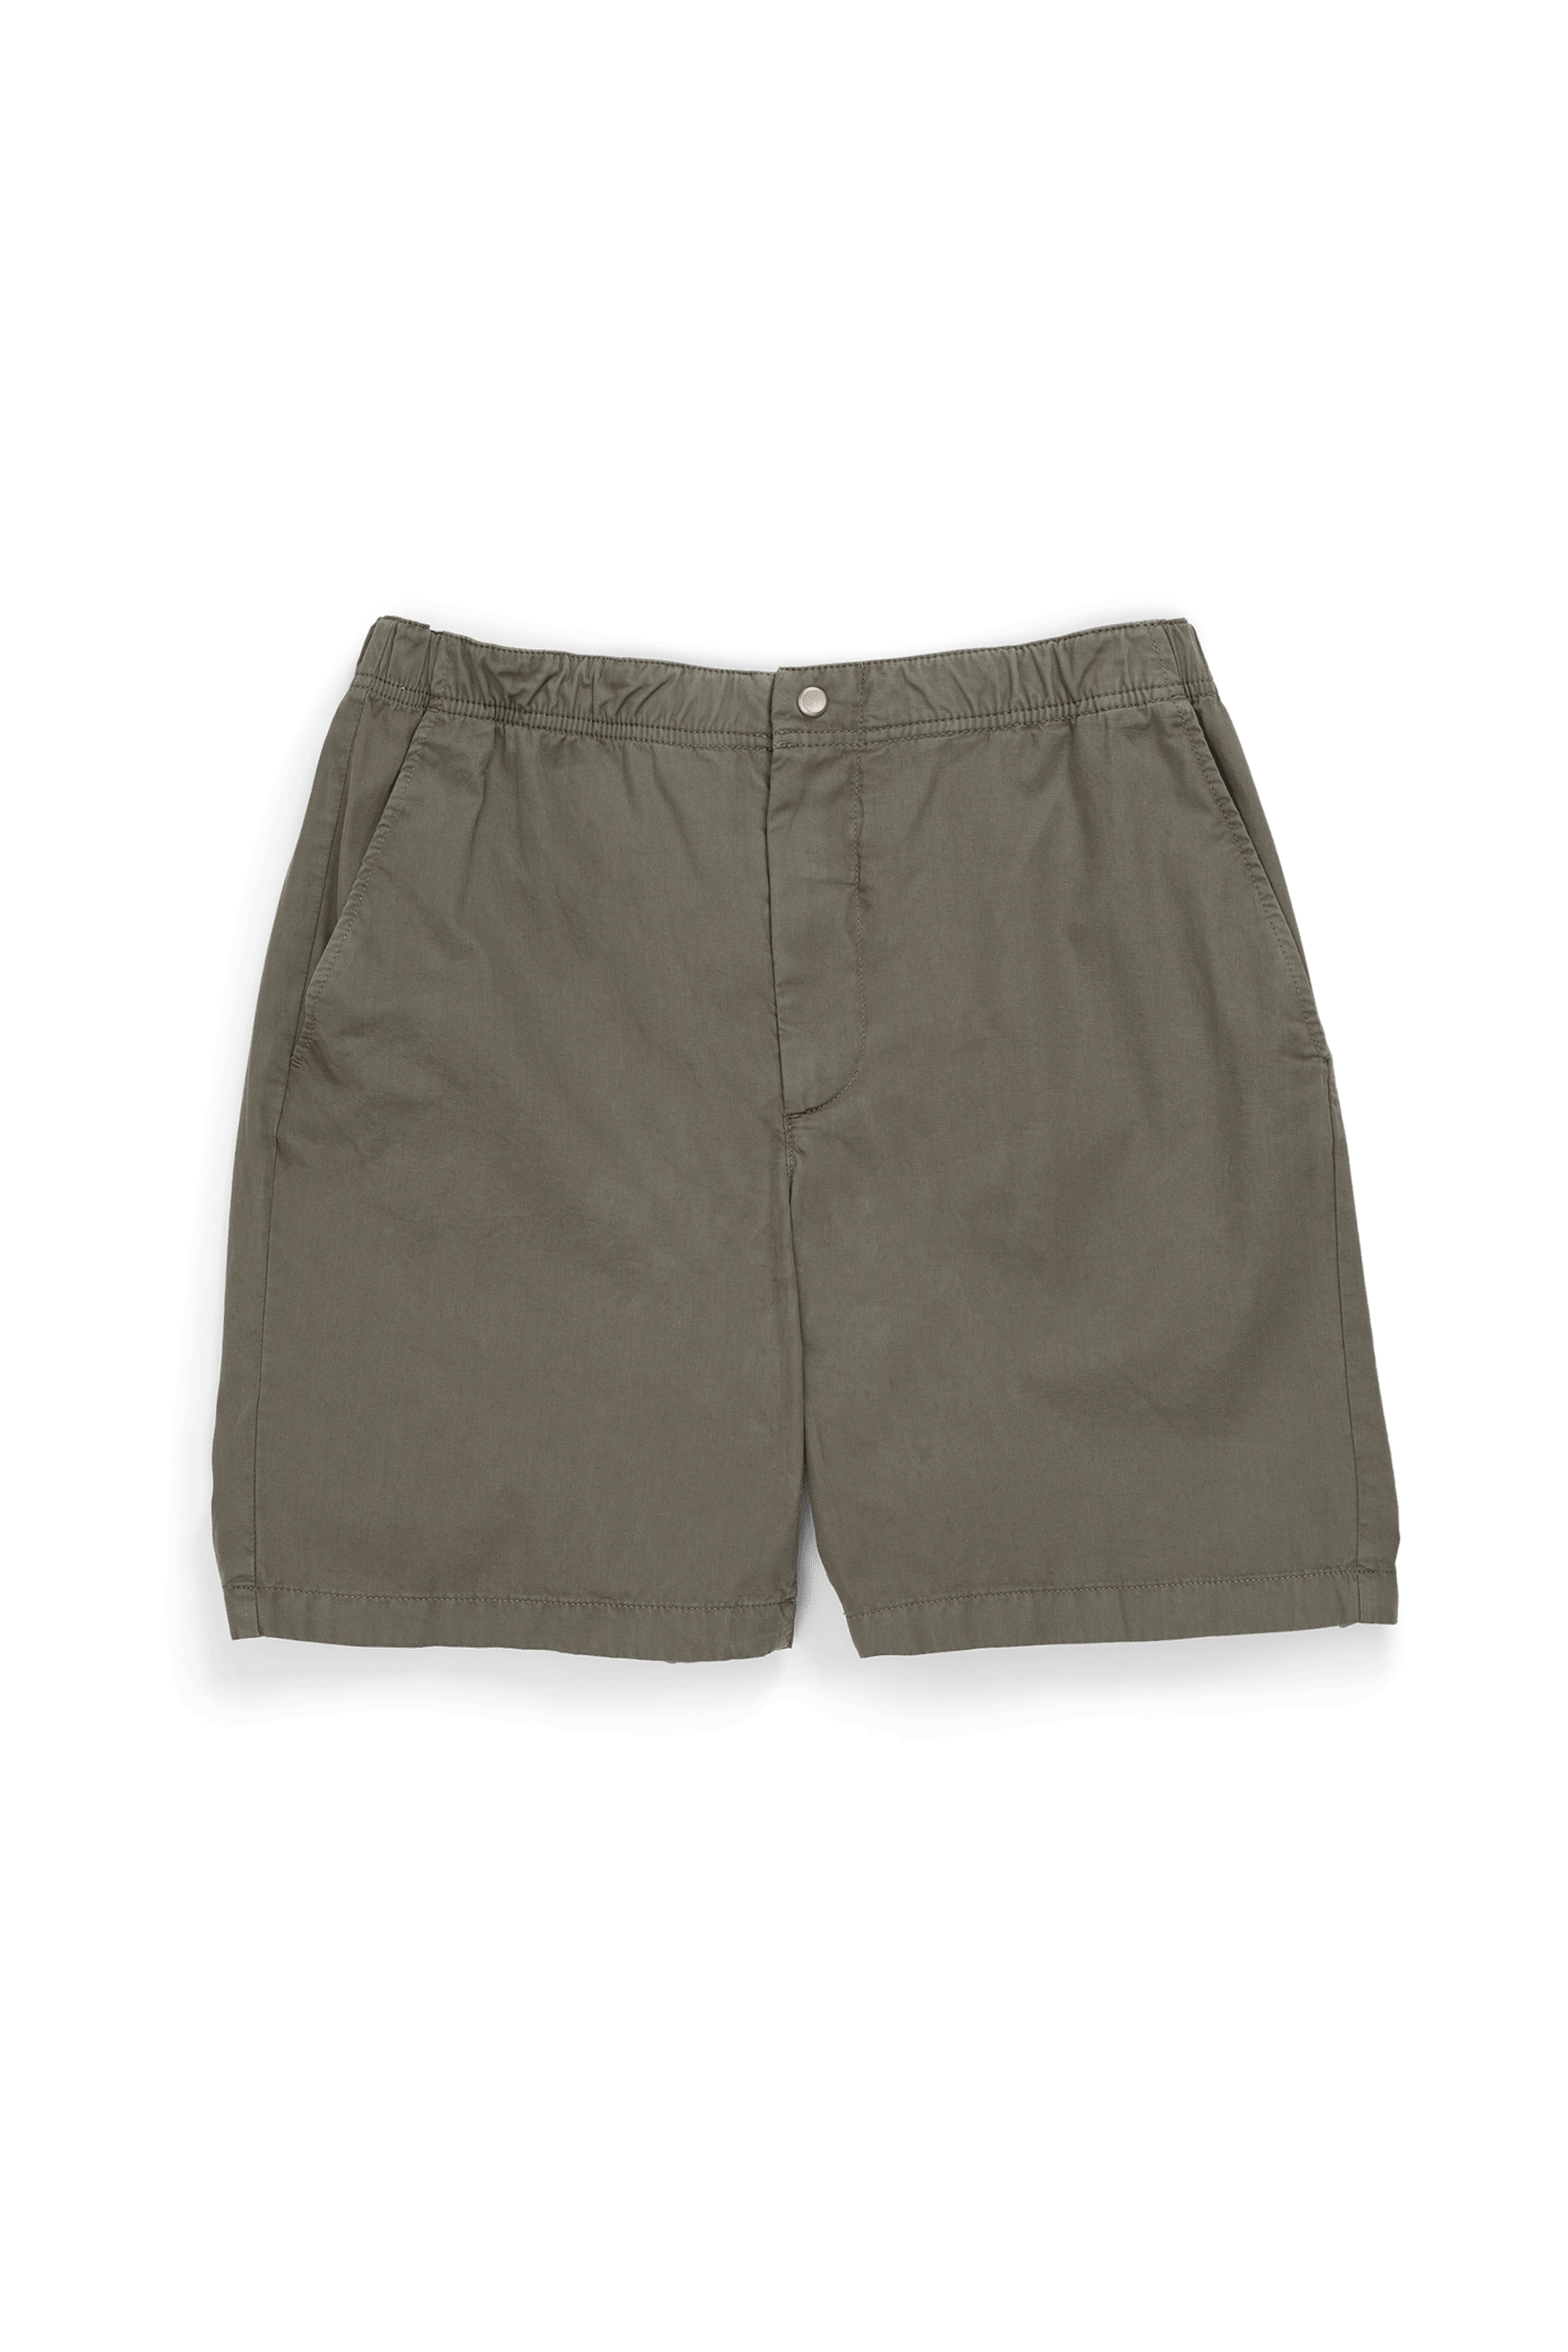 NORSE PROJECTS Ezra Light Twill Shorts - Dried Green Front